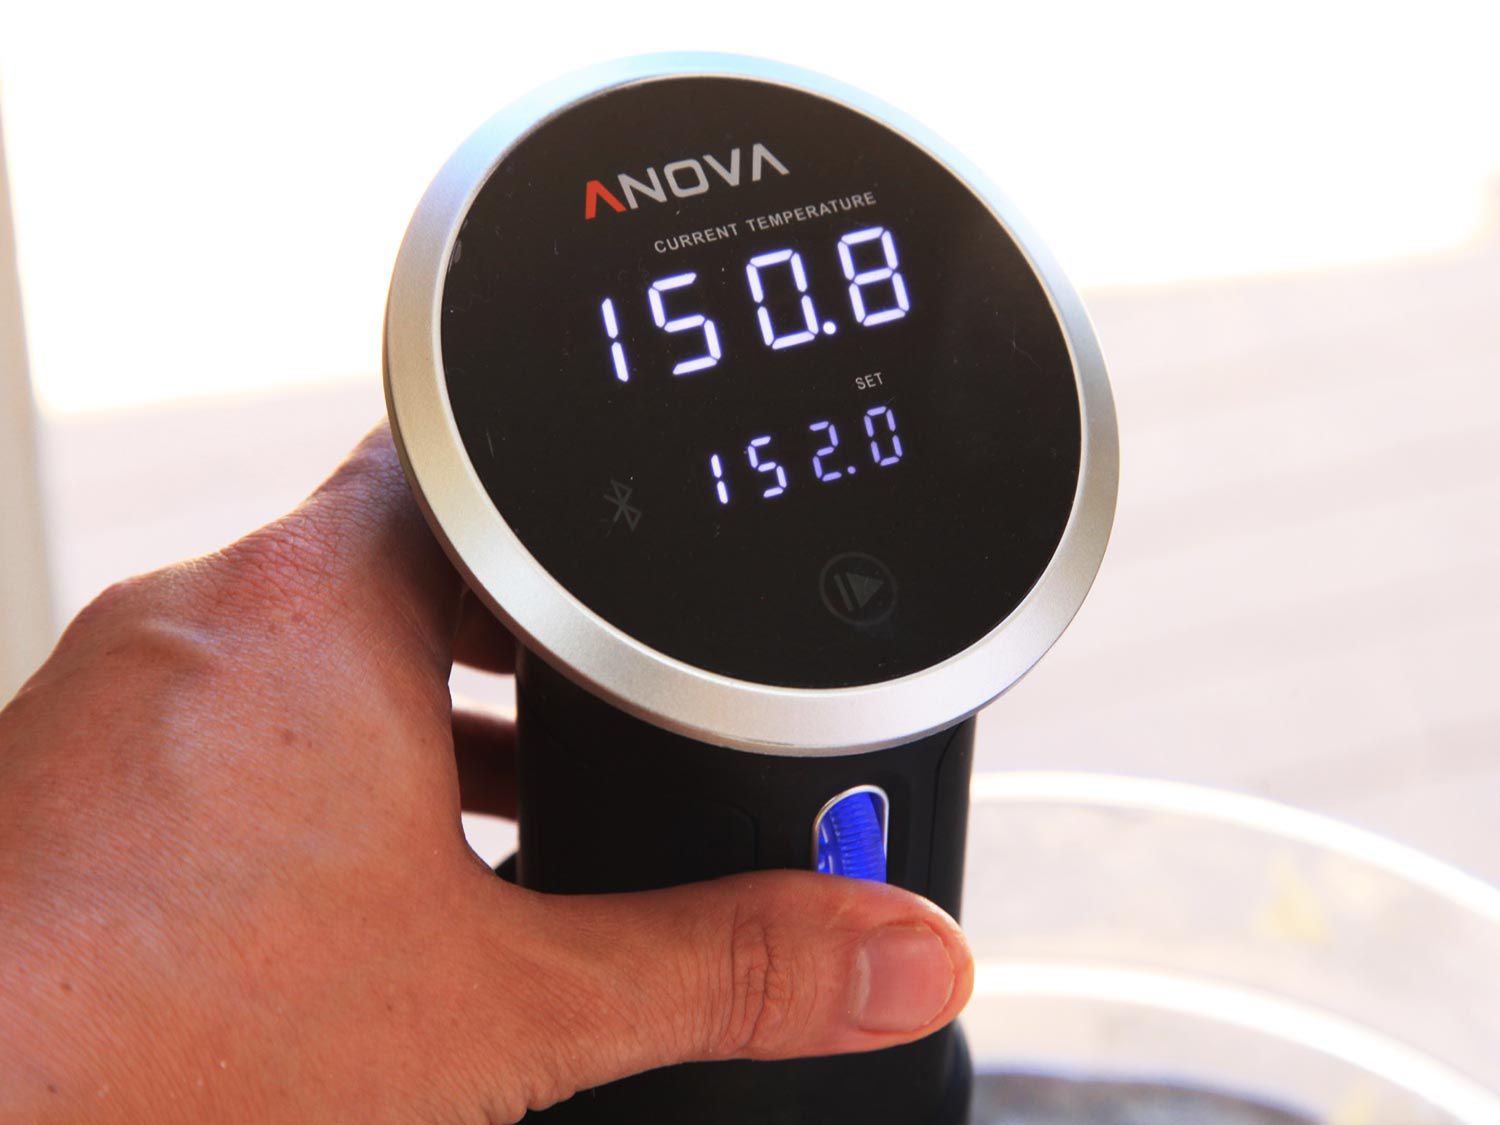 Setting the temperature for sous vide pork ribs on Anova immersion circulator